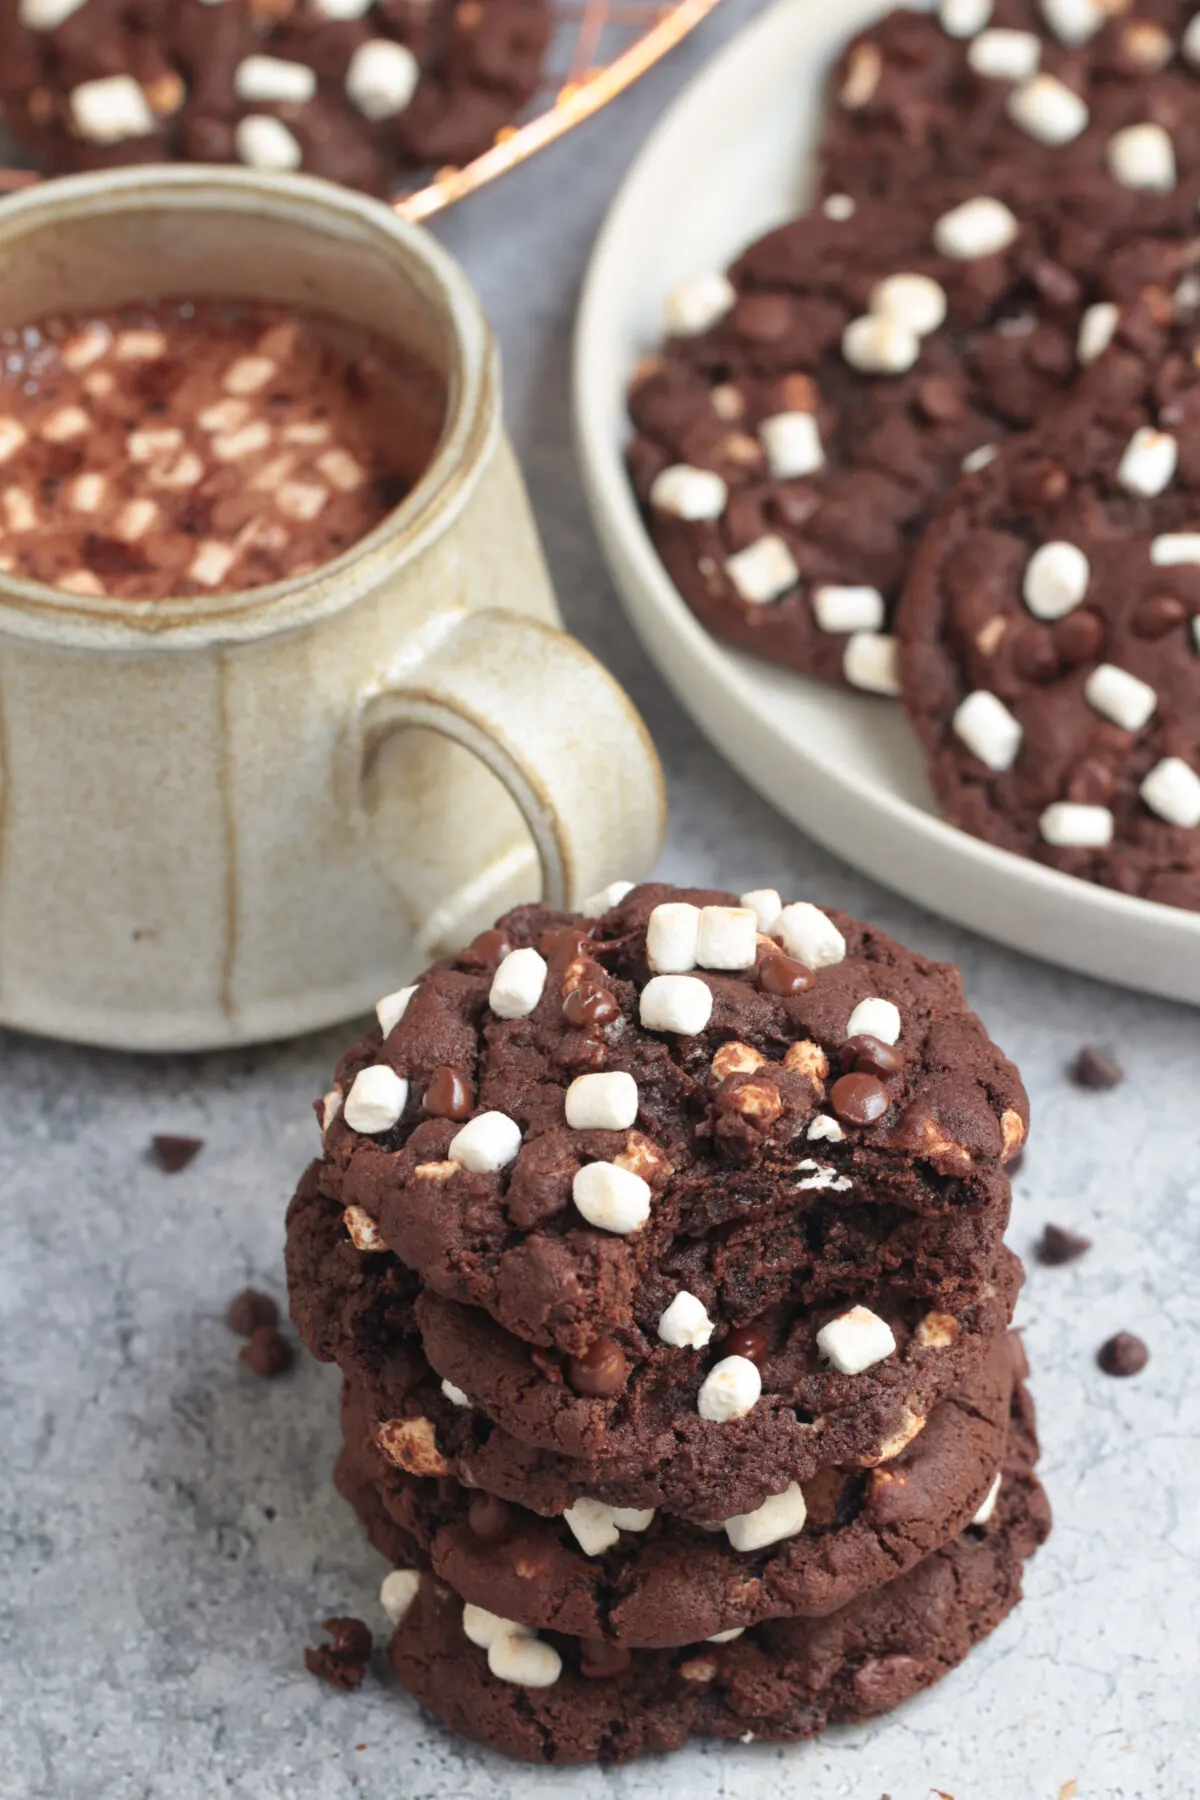 These hot chocolate cookies are the perfect winter treat! They're easy to make, soft and chewy, and they taste just like a rich hot cocoa.